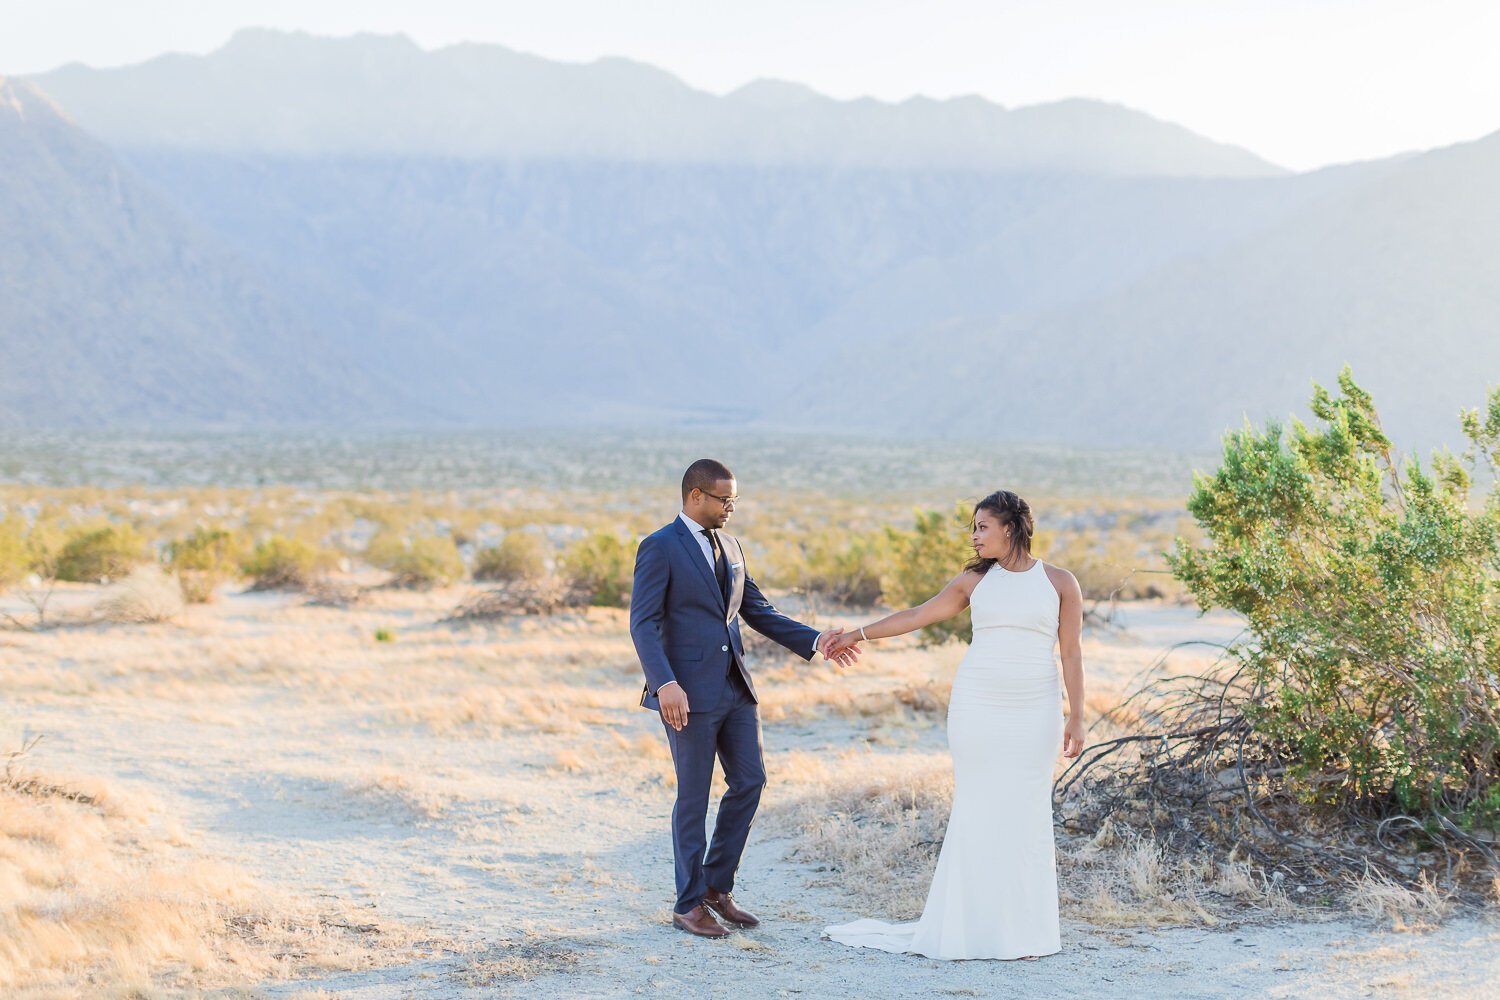 sevelle.elopement.palm.springs.sign.monocle.project-147.jpg